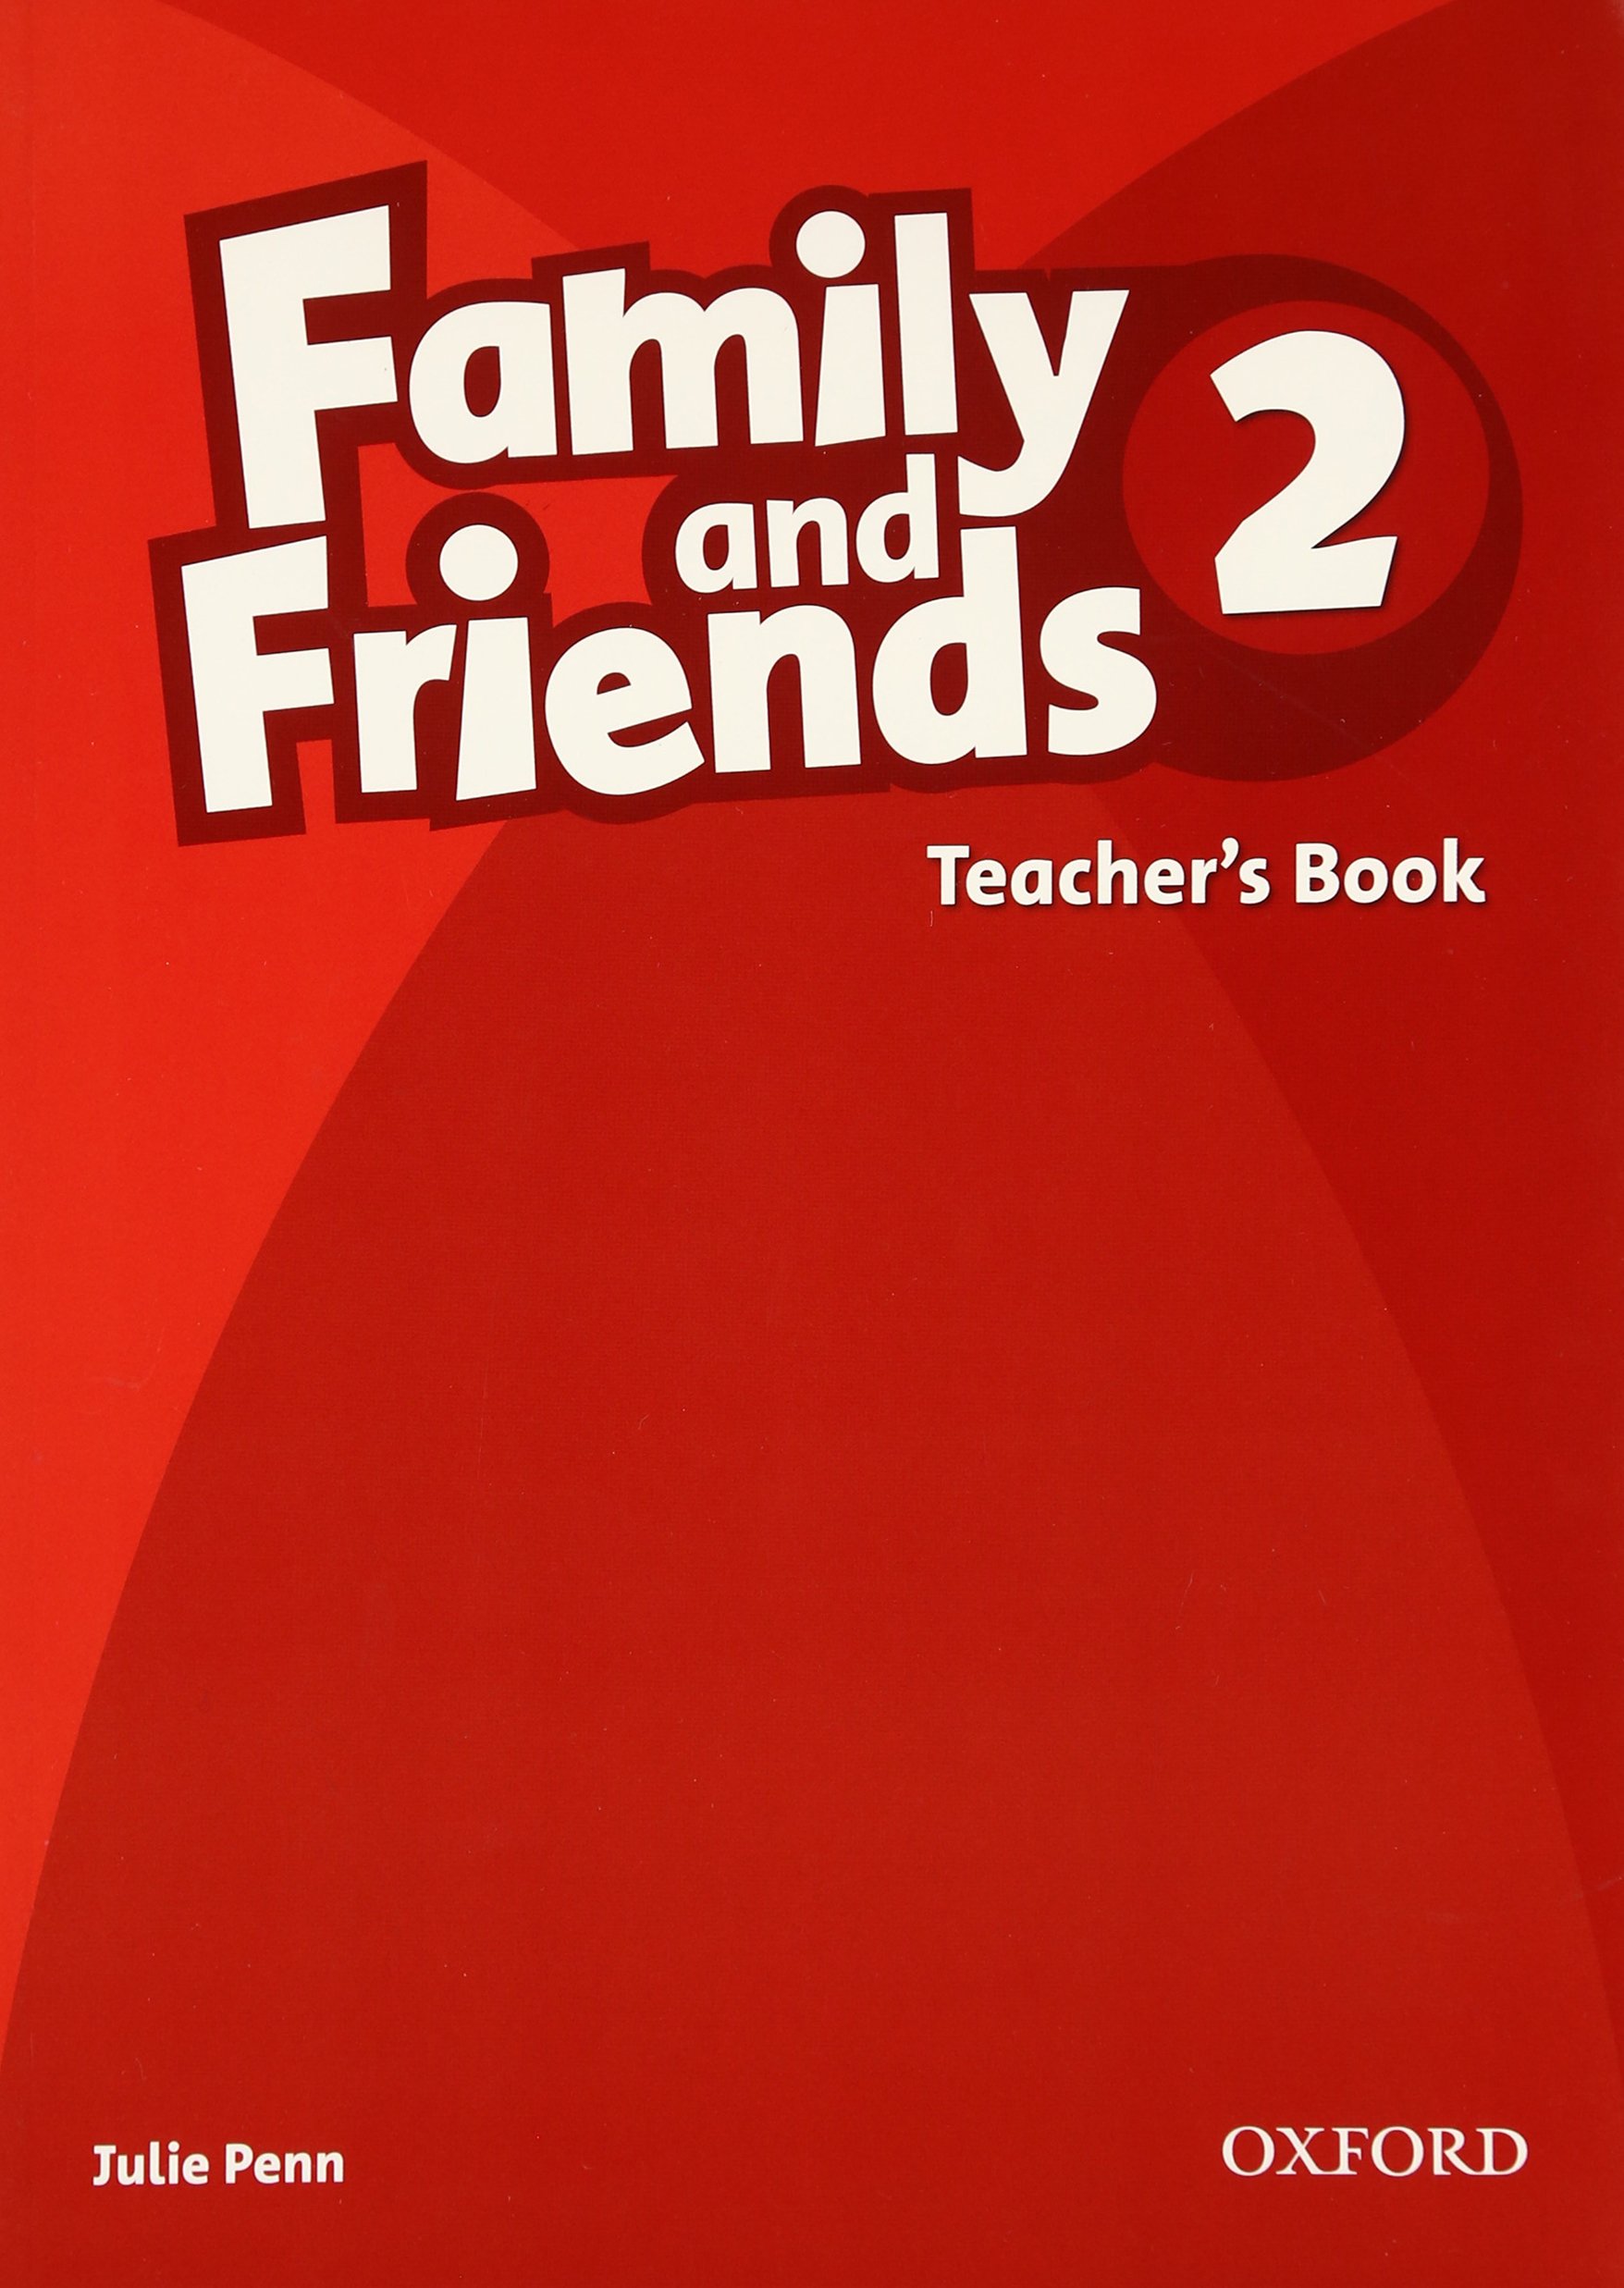 FAMILY AND FRIENDS 2 Teacher's Book